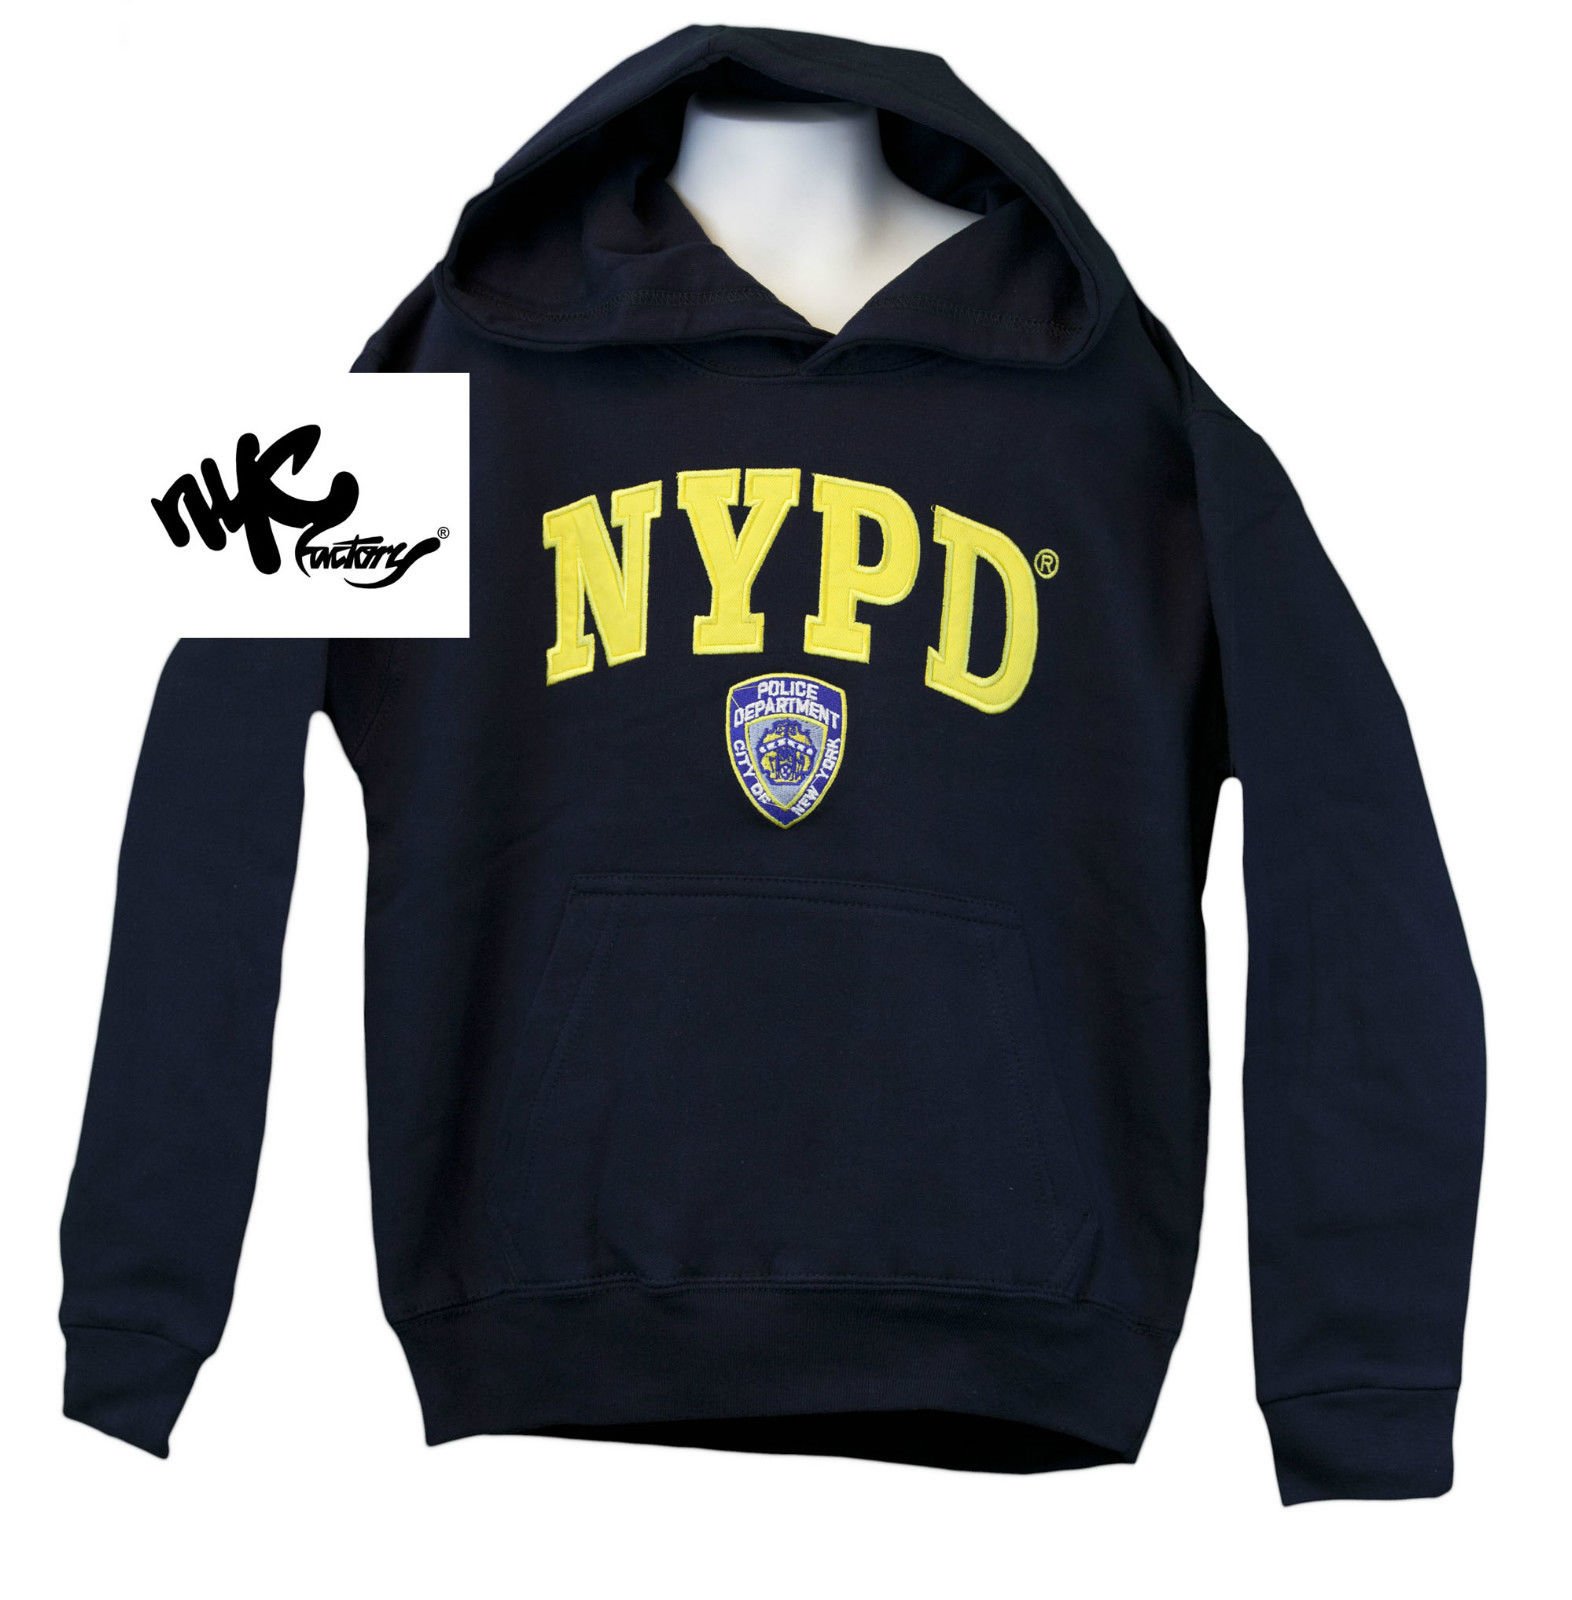 Kids NYPD New York Police Department Embroidered Hoodie Navy Sweatshirt XS-L